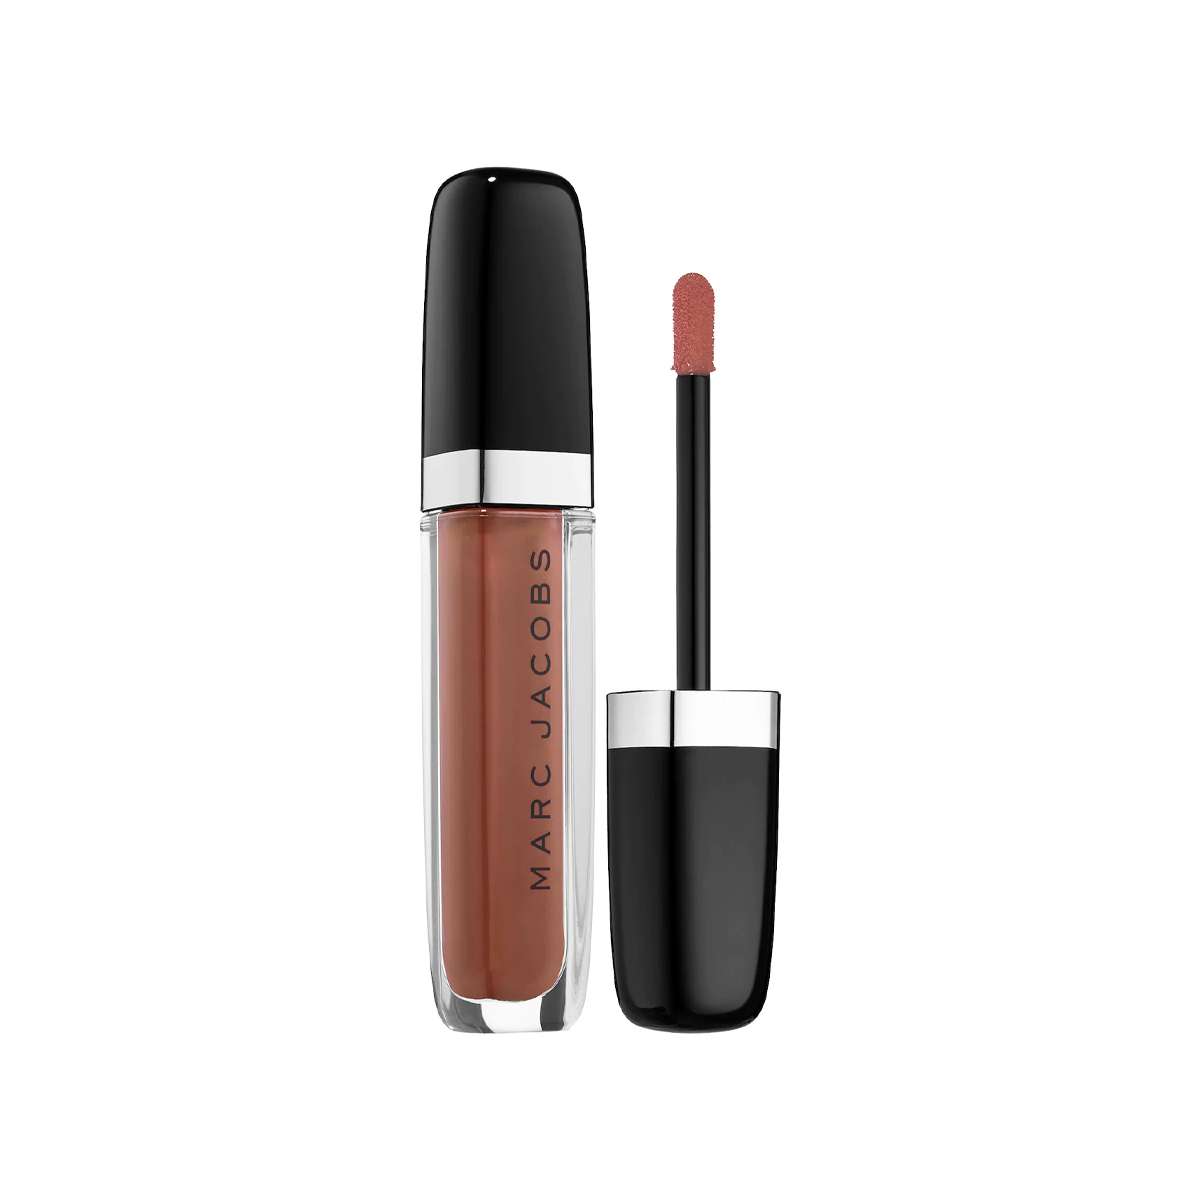 Marc Jacobs Beauty Enamored Hi-Shine Lip Lacquer Lipgloss in Work It